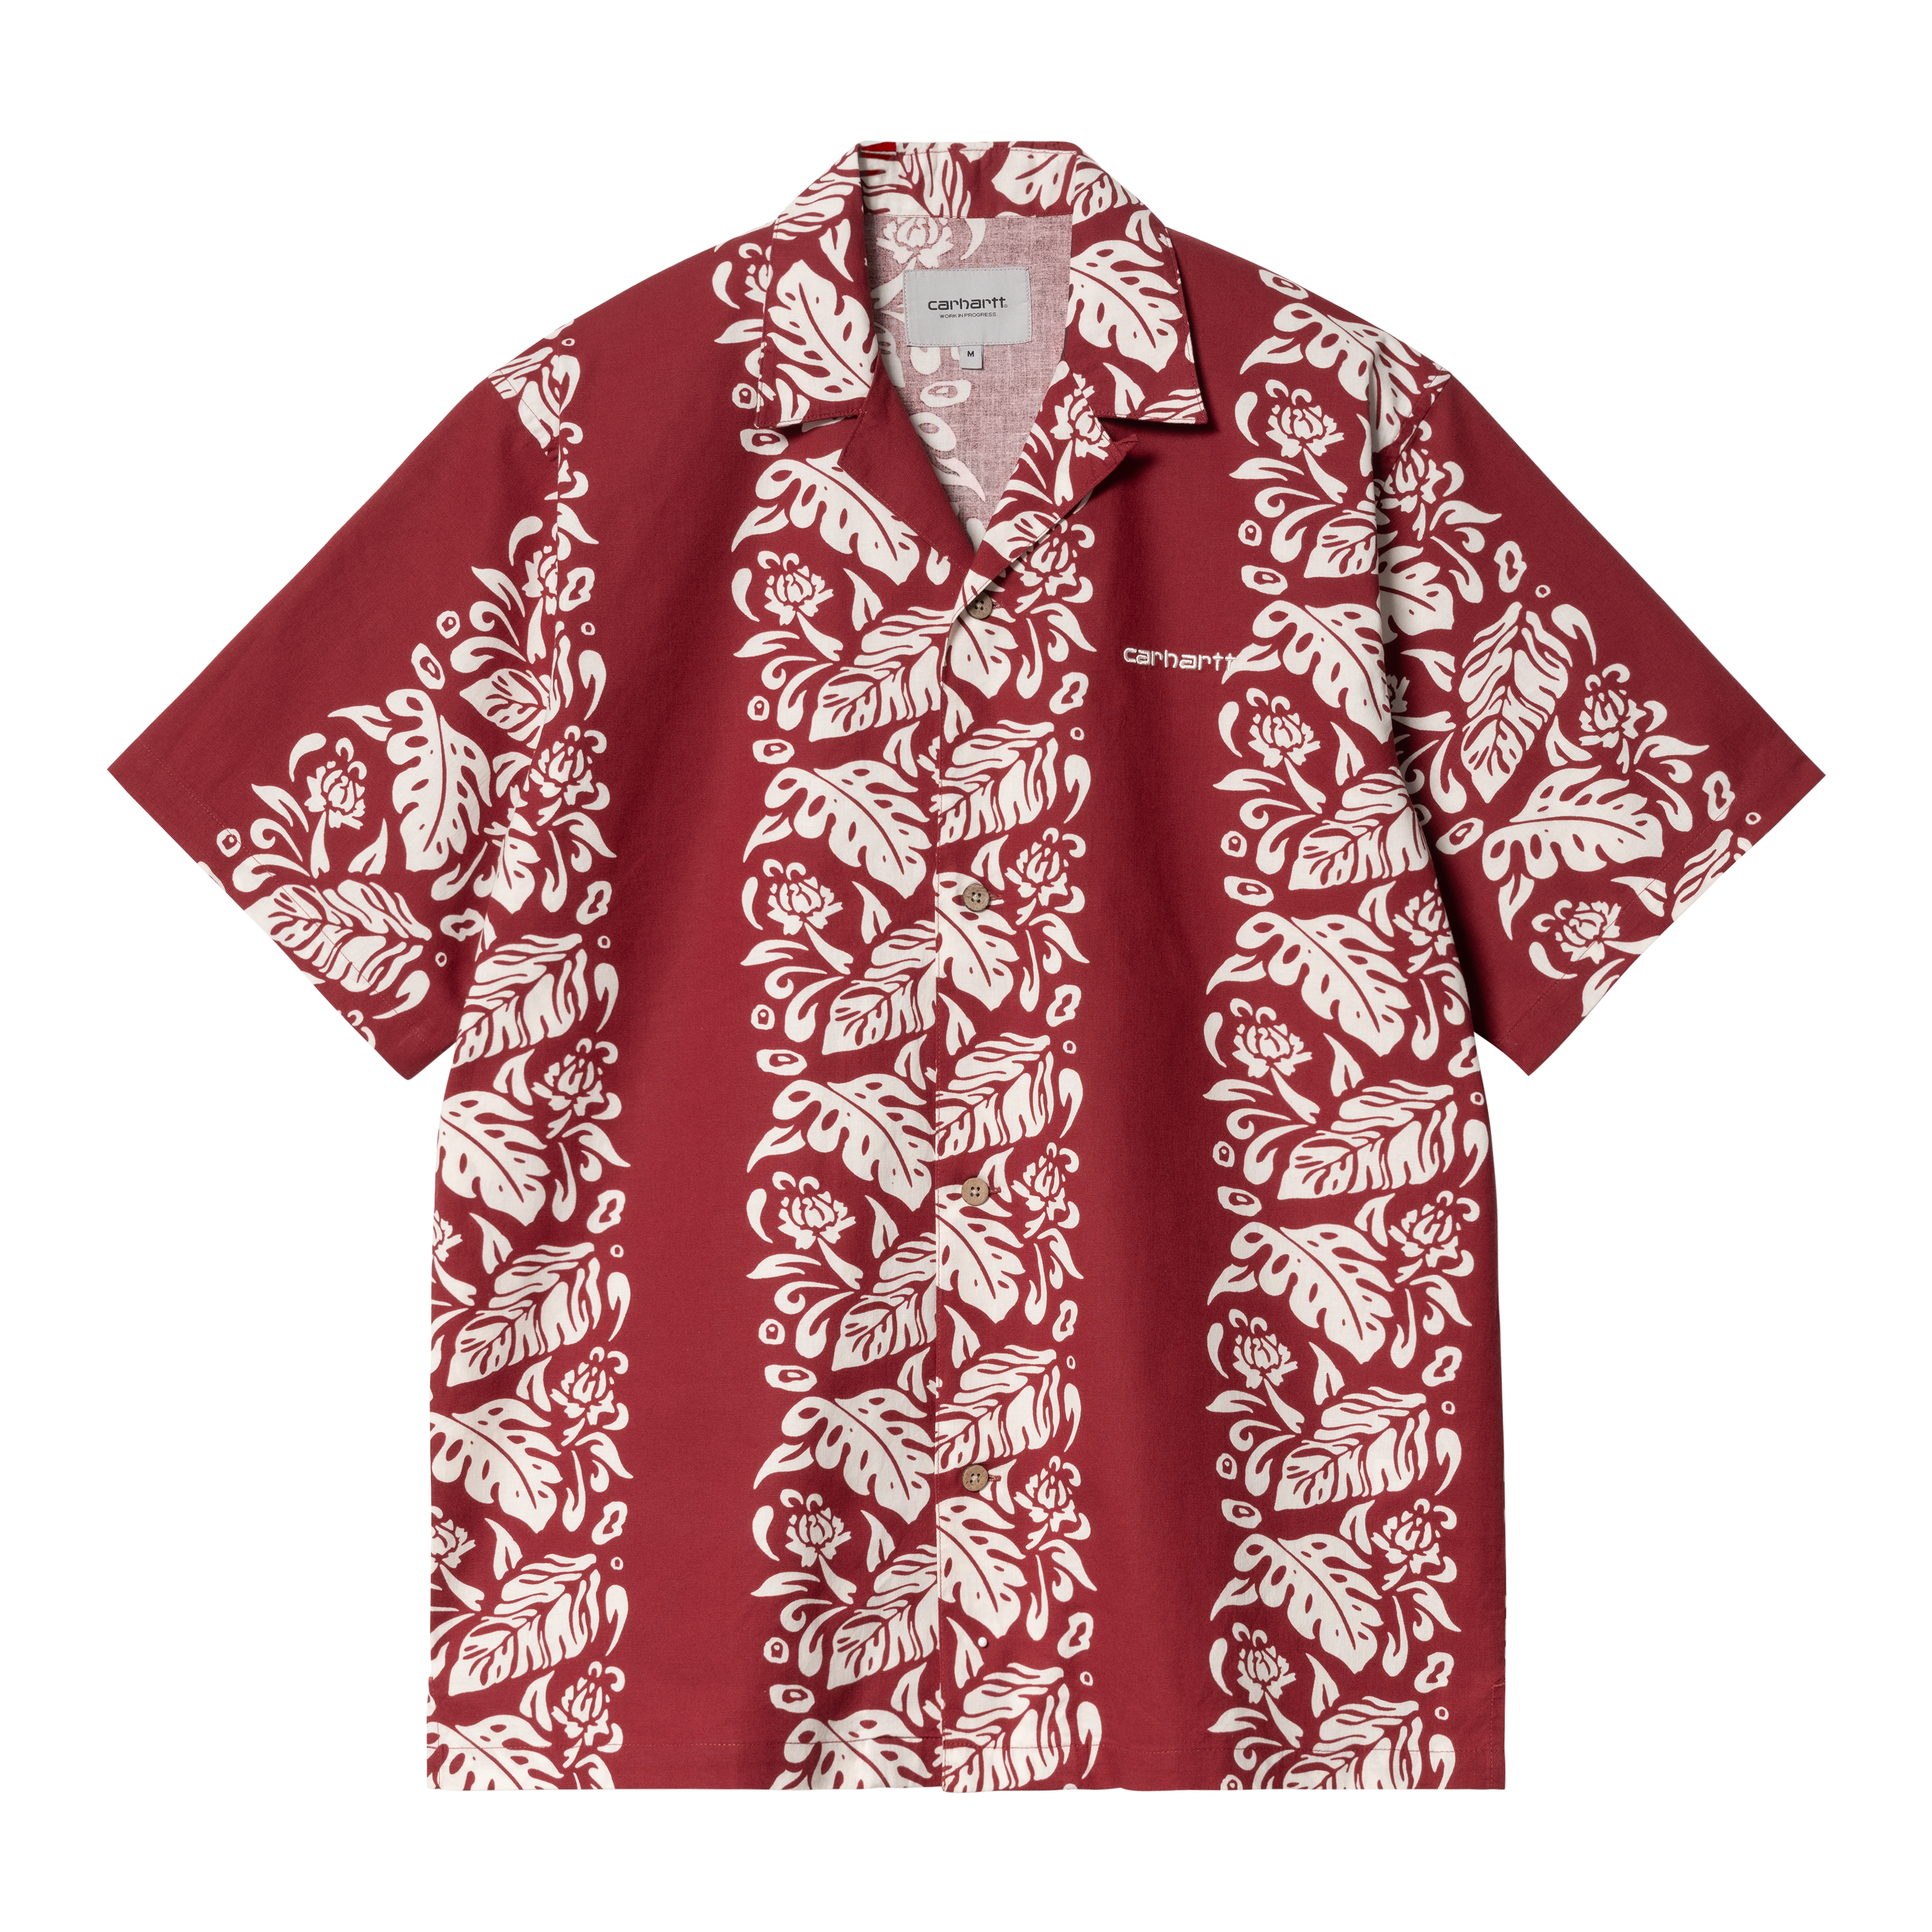 Carhartt WIP Short Sleeve Floral Shirt in Red